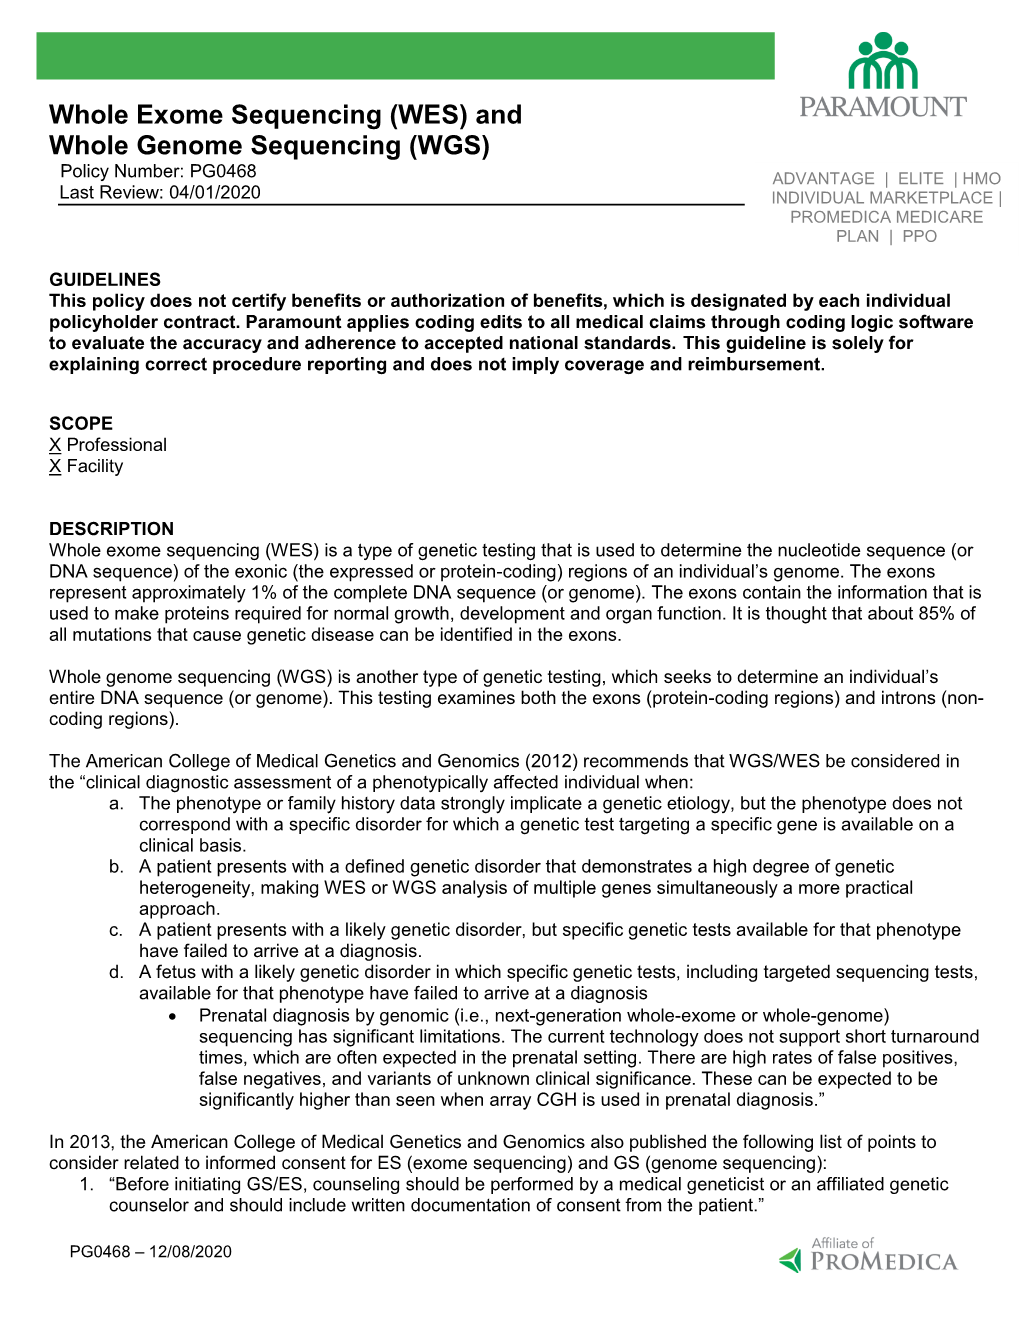 PG0468 Whole Exome Sequencing (WES)